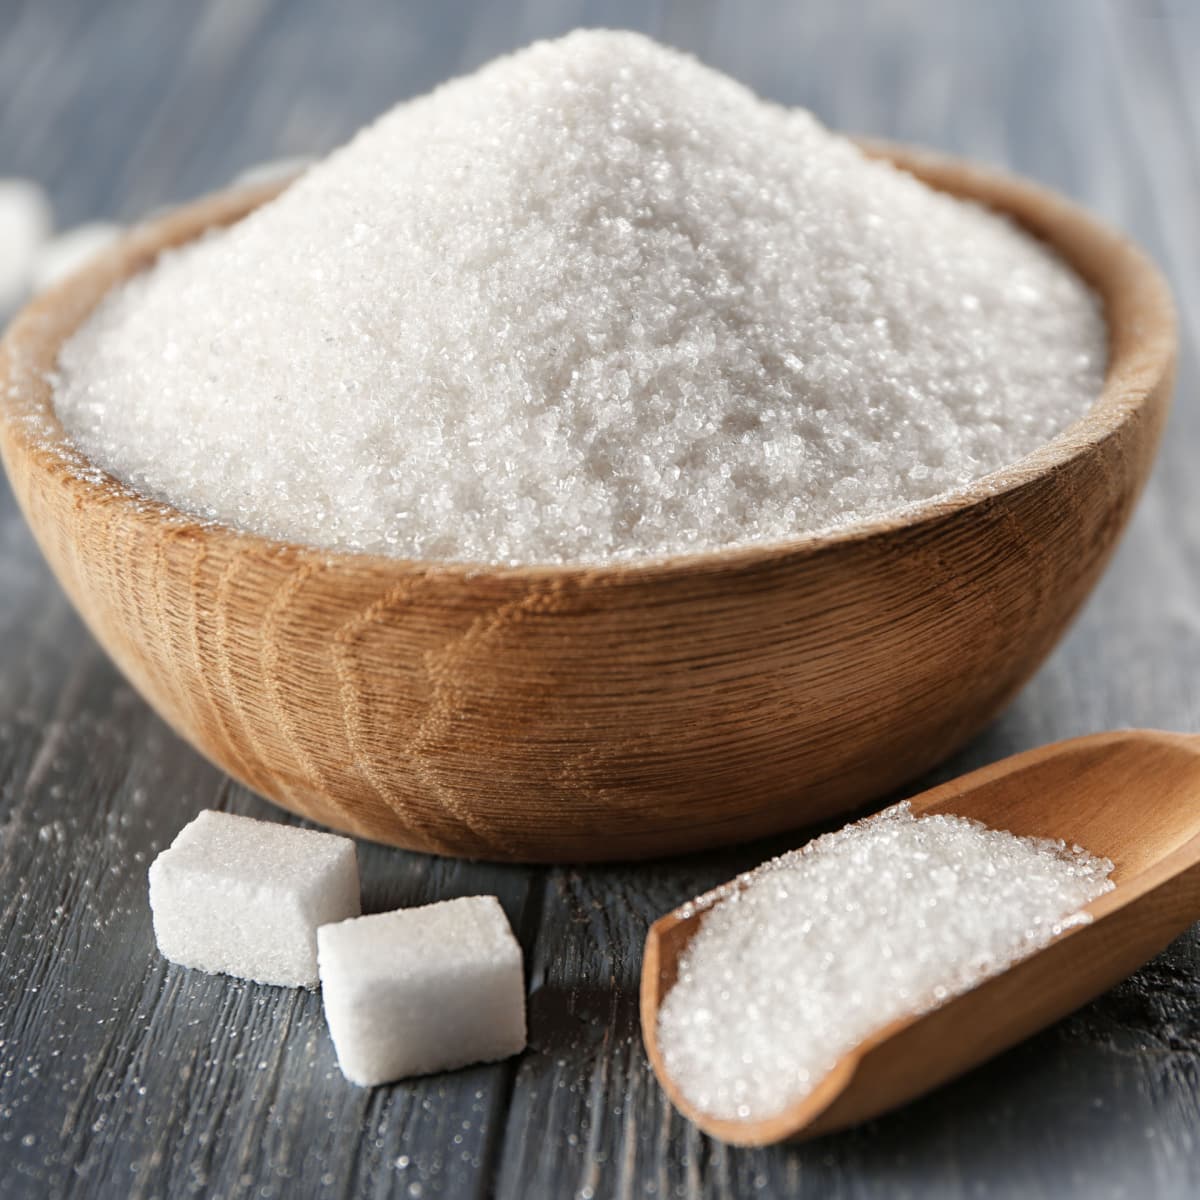 White Table Sugar on a Wooden Bowl and Scooper